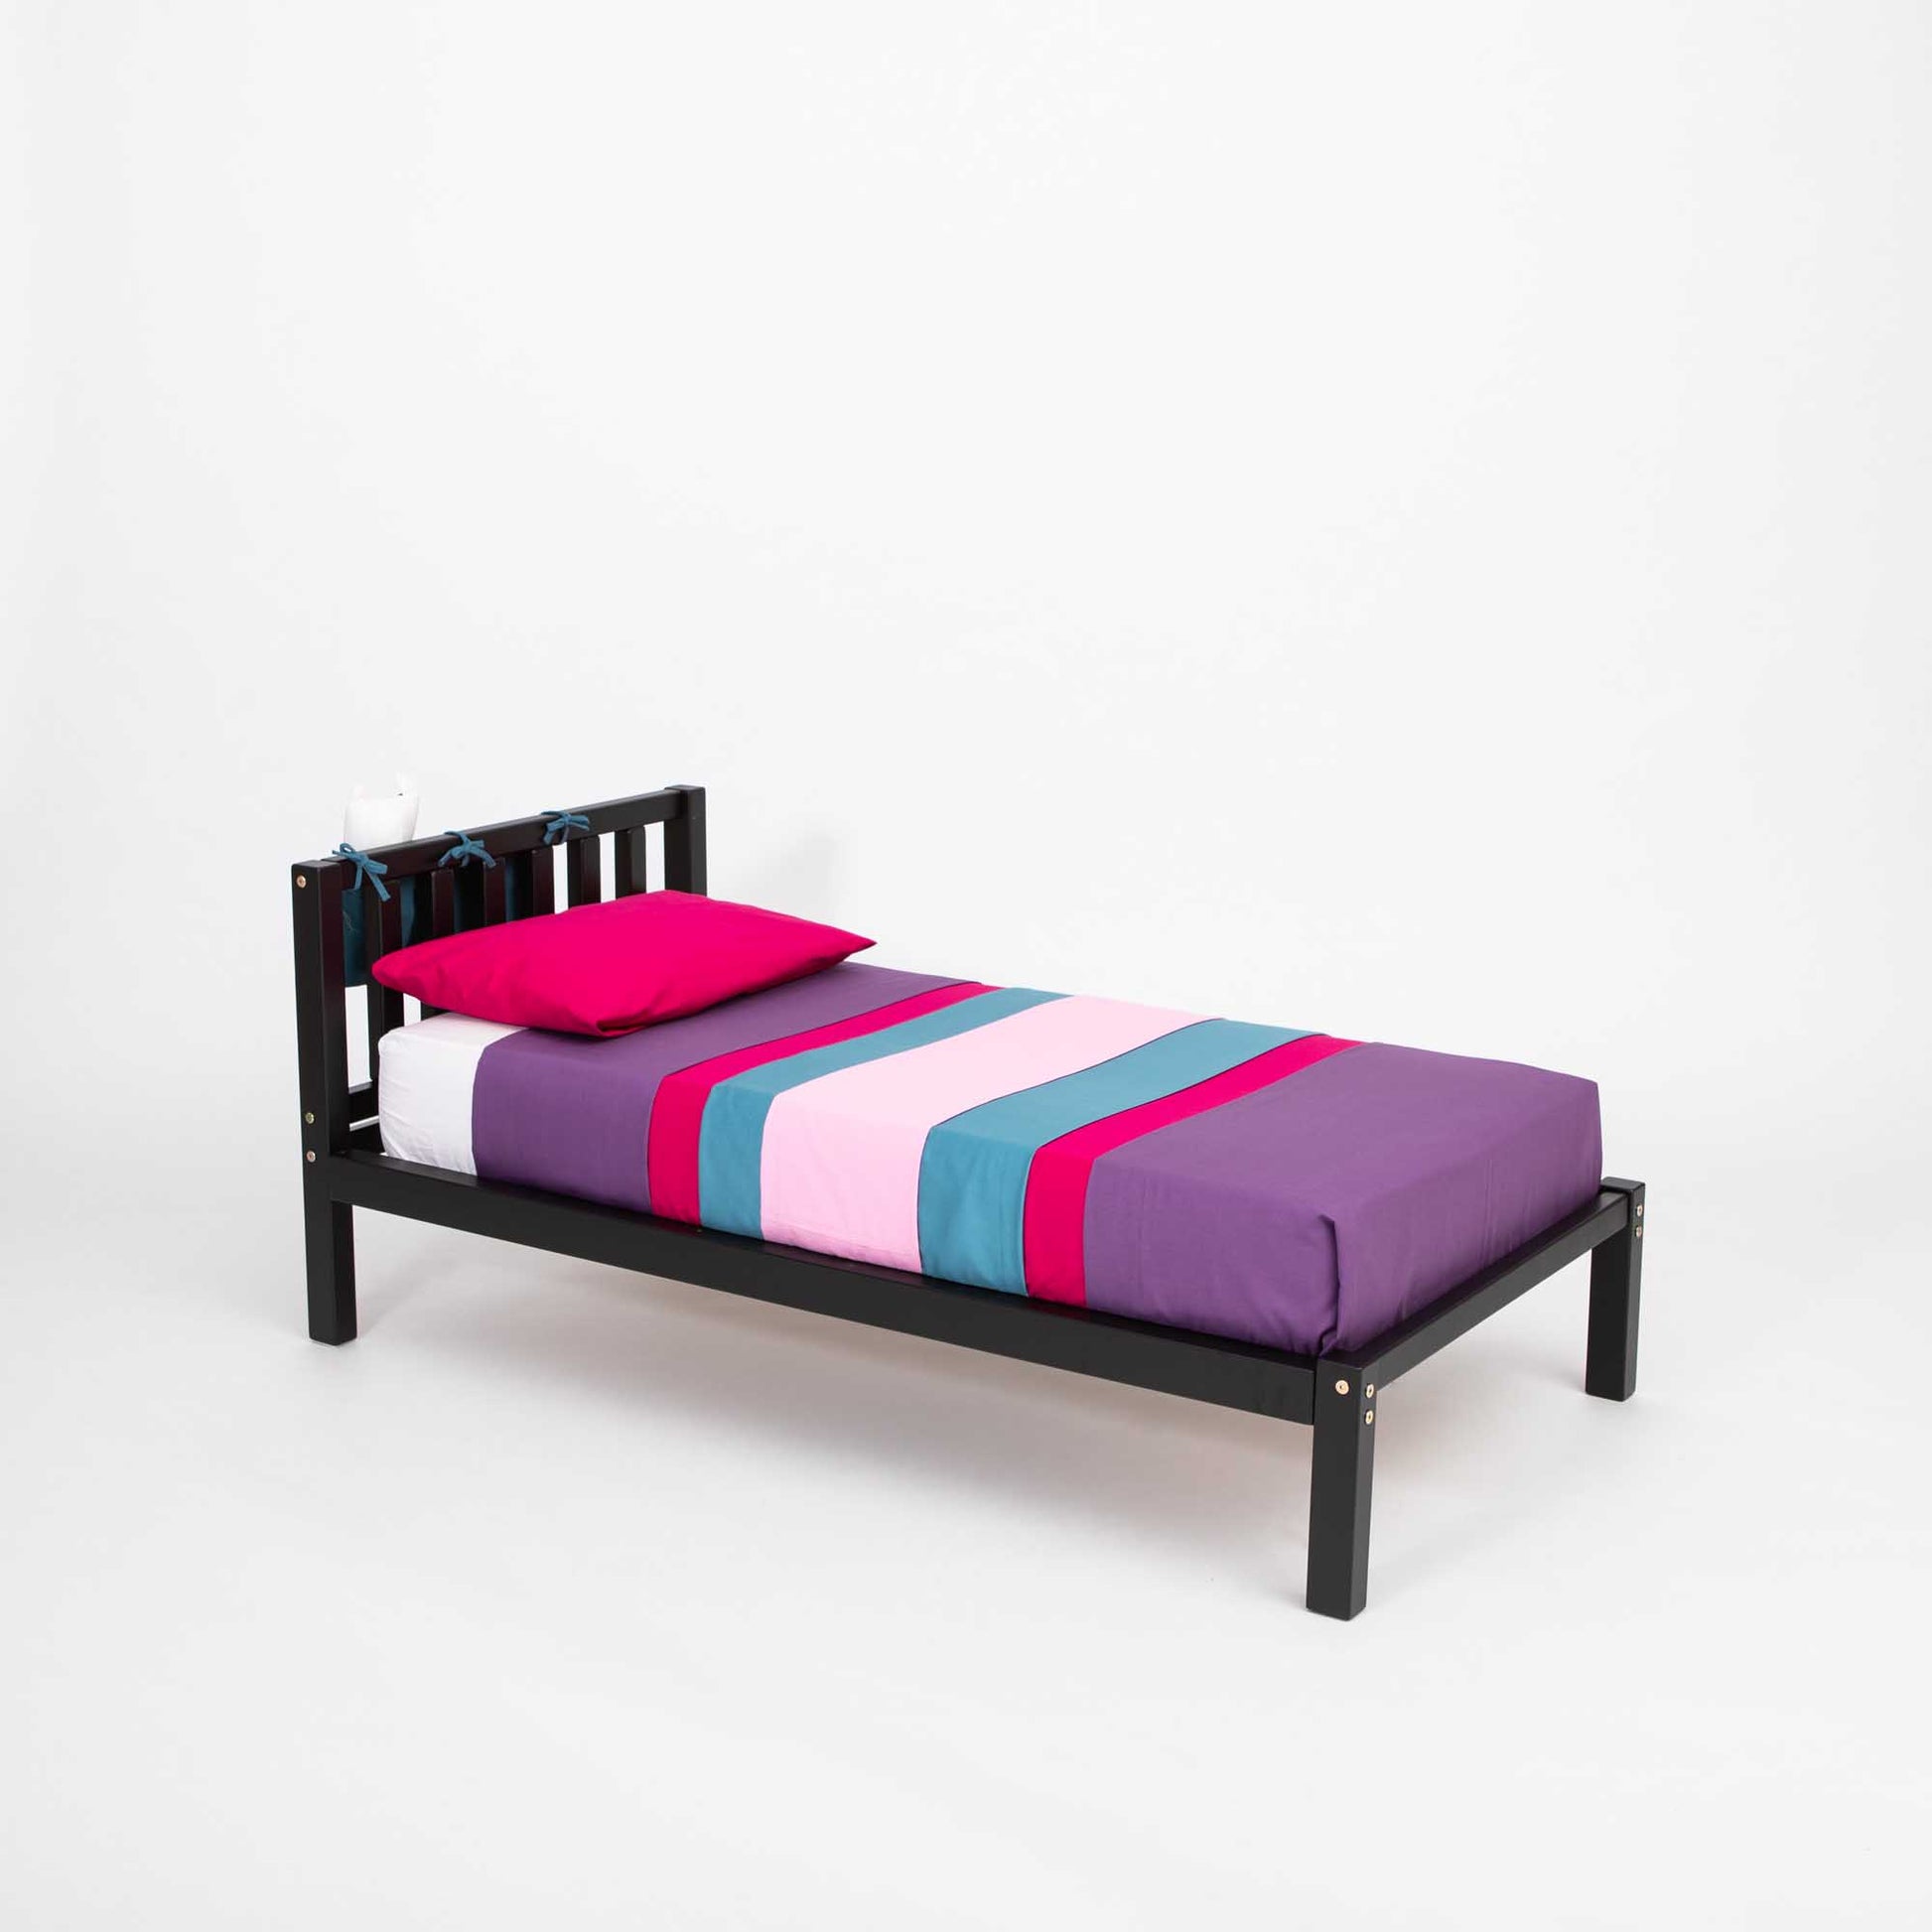 A black Kids' bed on legs with a headboard and a pink and purple striped sham, perfect for children seeking independence sleeping in a solid wood Montessori-style frame, from Sweet Home From Wood.